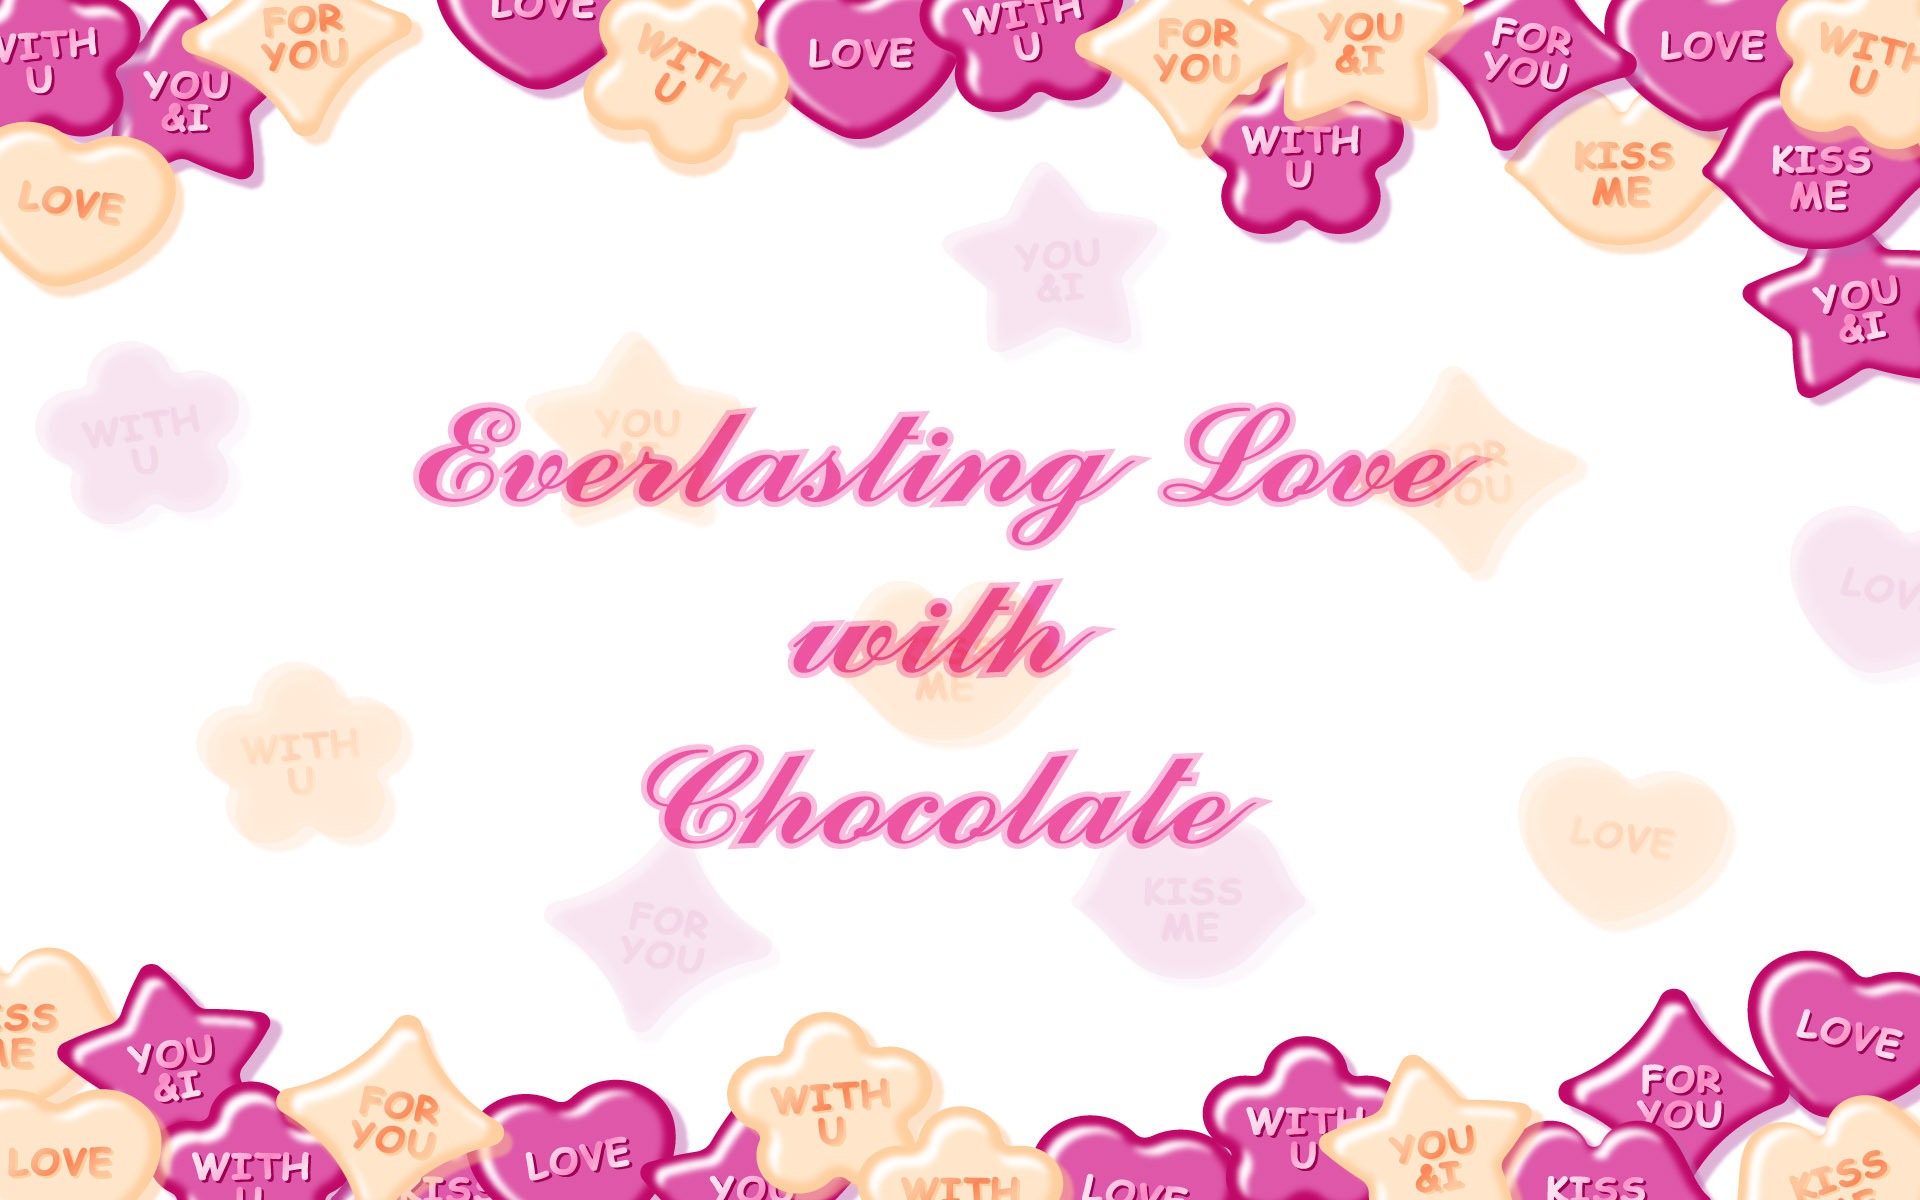 Valentine's Day Theme Wallpapers (1) #11 - 1920x1200